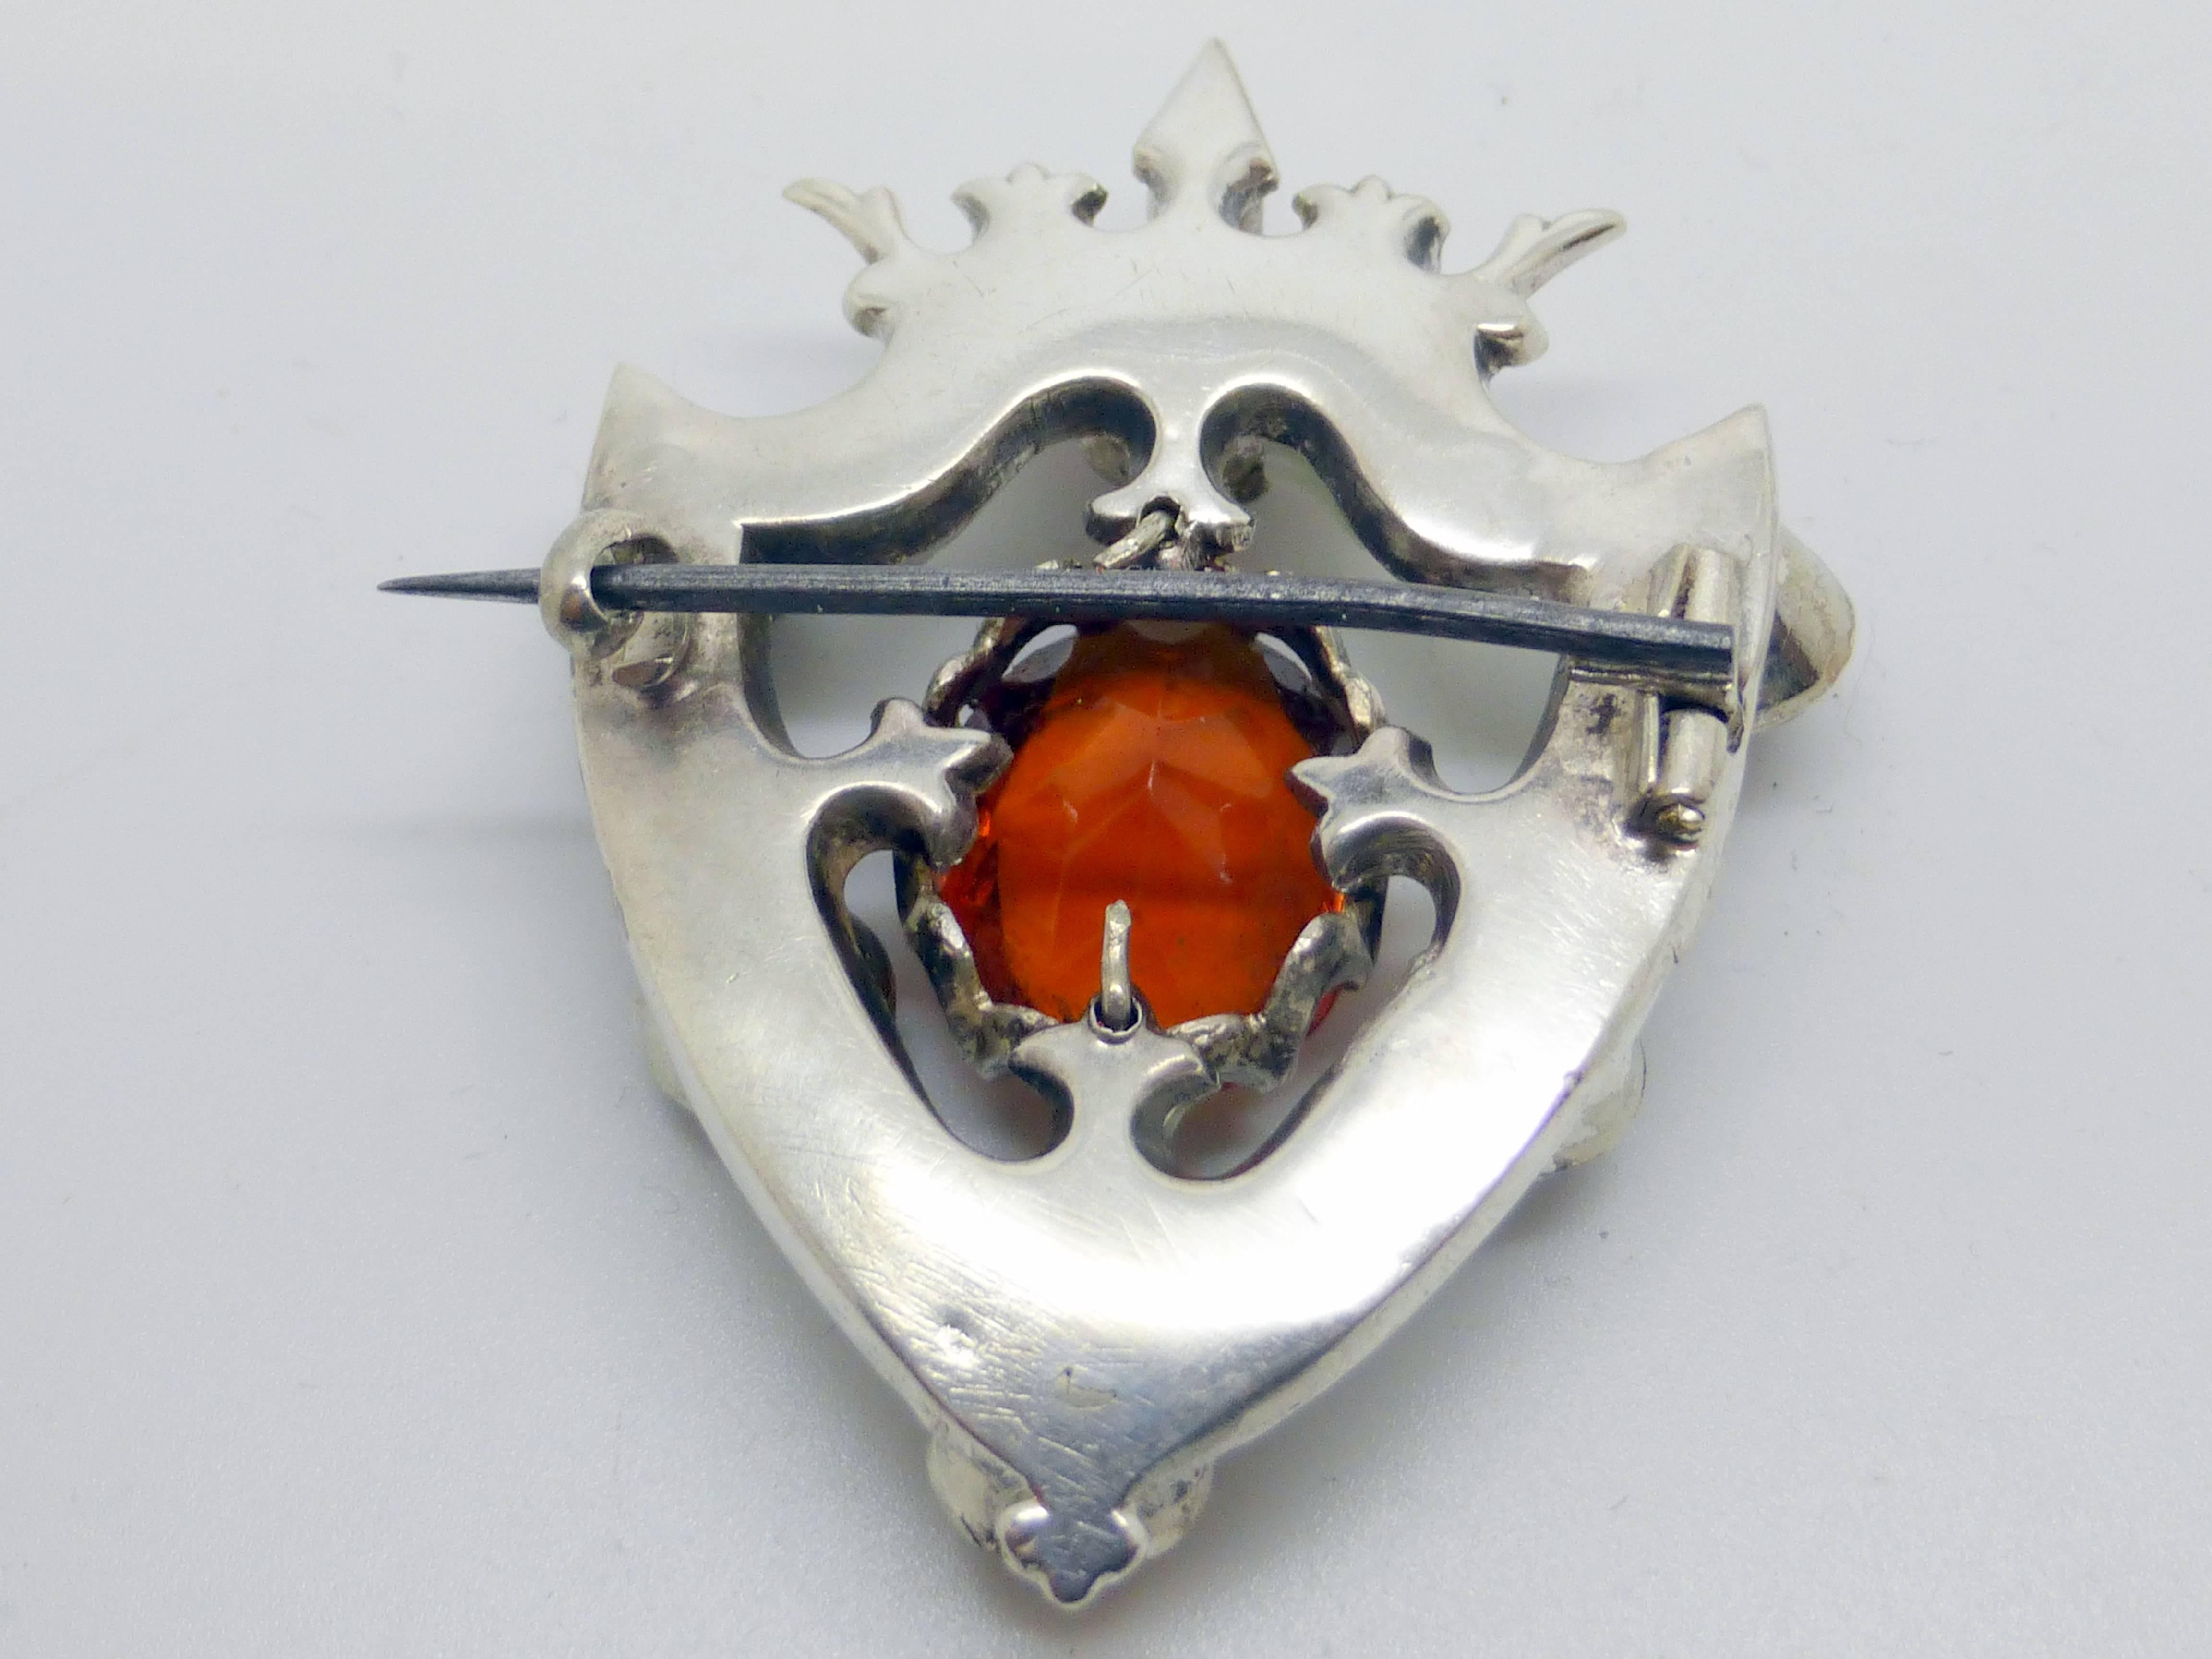 Victorian, sterling silver-mounted, shield-form Scottish agate brooch with central cairmgorm, and cut stones, Scotland, Ca. 1880's. Sterling silver mount is topped by a crown. @2